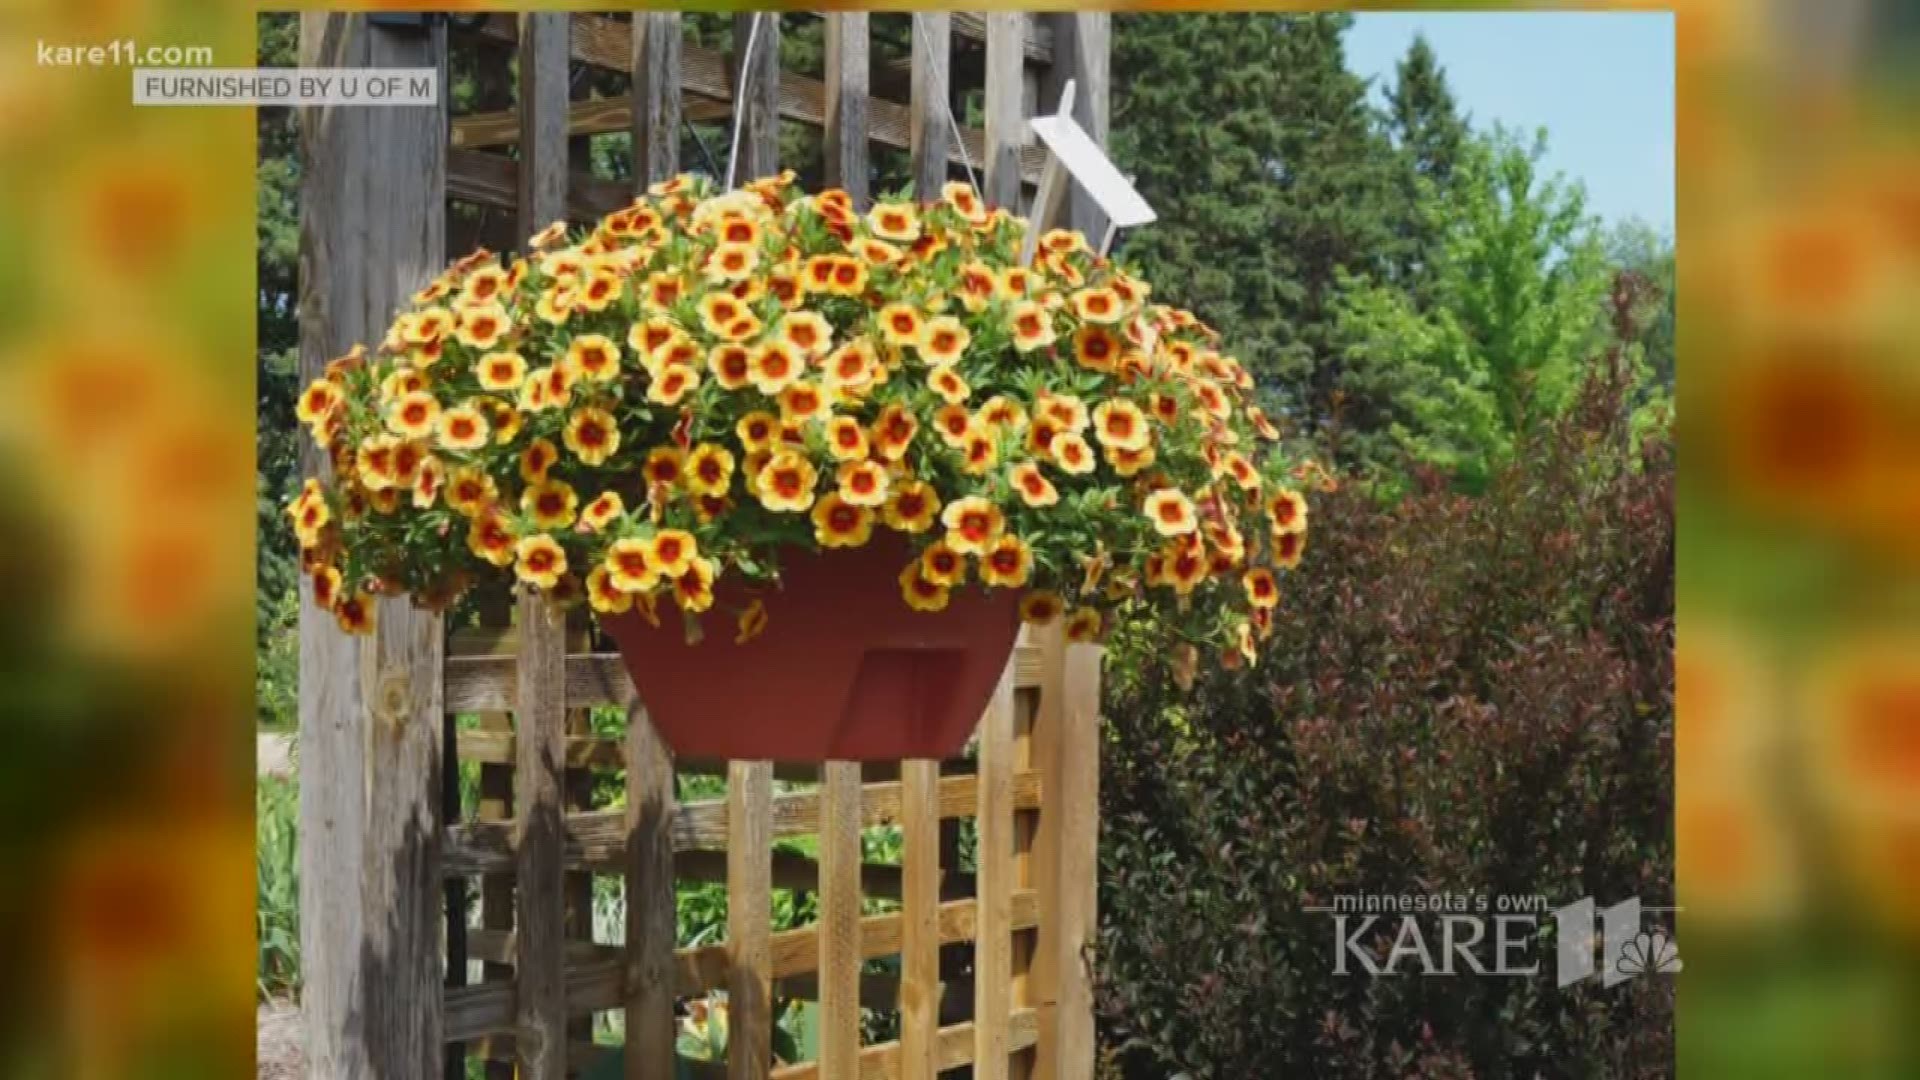 In this grow with KARE, the University of Minnesota tested which annuals are the best for you flower beds and yards.